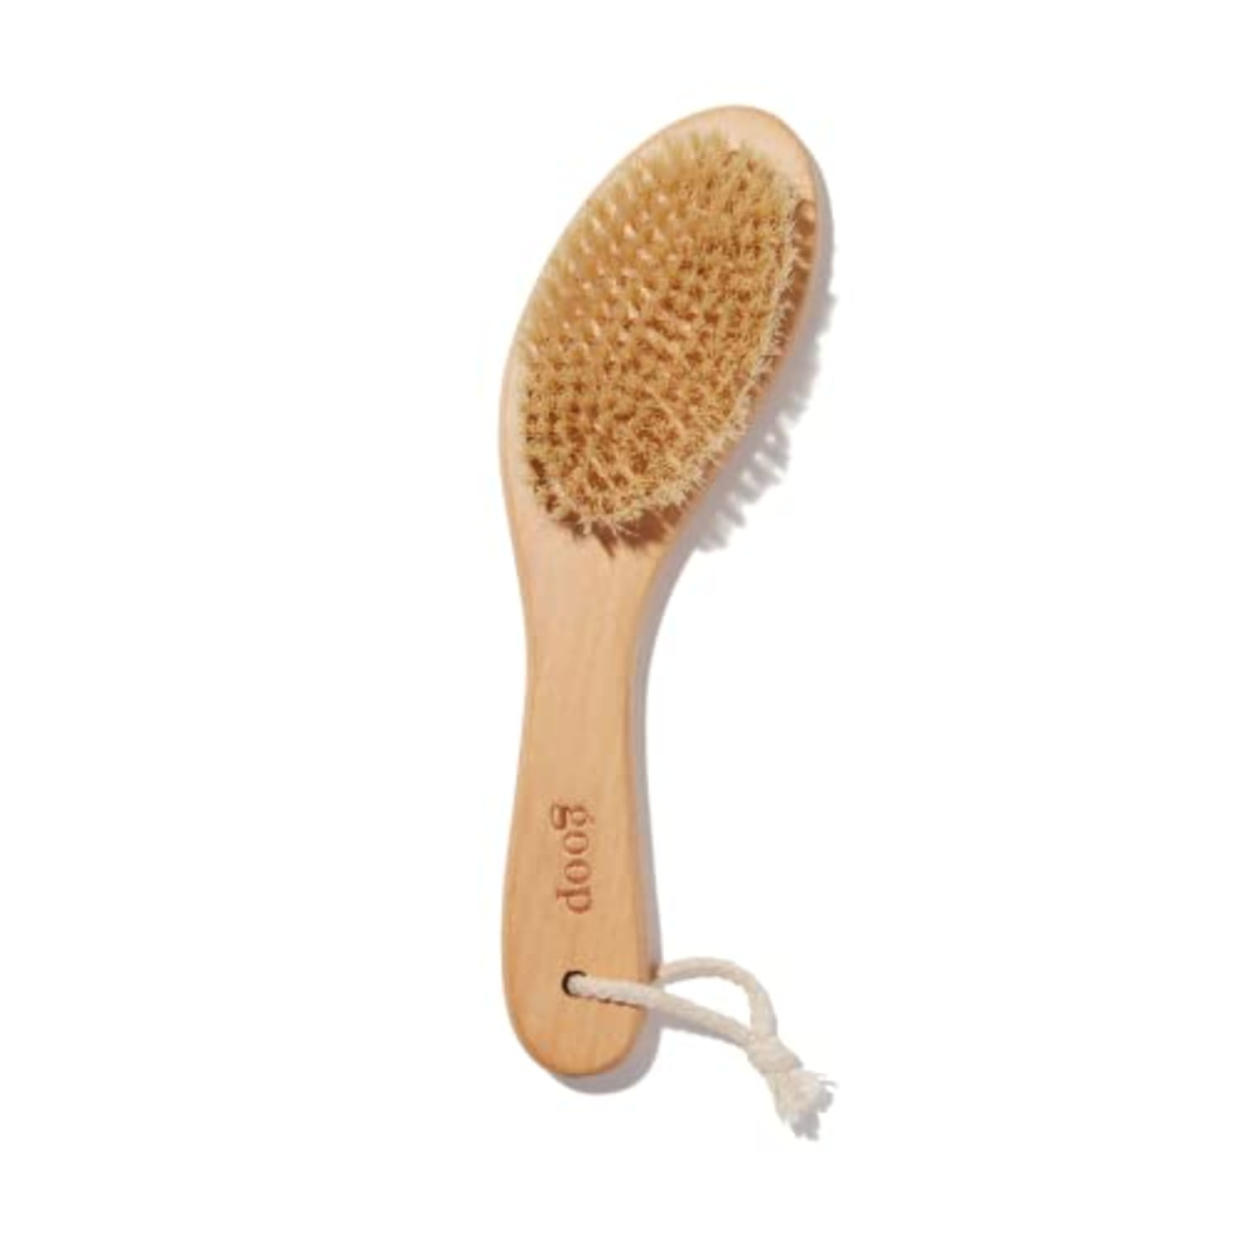 goop Beauty Dry Brush | Exfoliating & Detoxifying for Dry Skin | Wooden Brush with Natural Biodegradable Sisal Fibers | Sweeps Away Dead Skin Cells for Luminous, Smooth Skin | FSC-Certified (AMAZON)